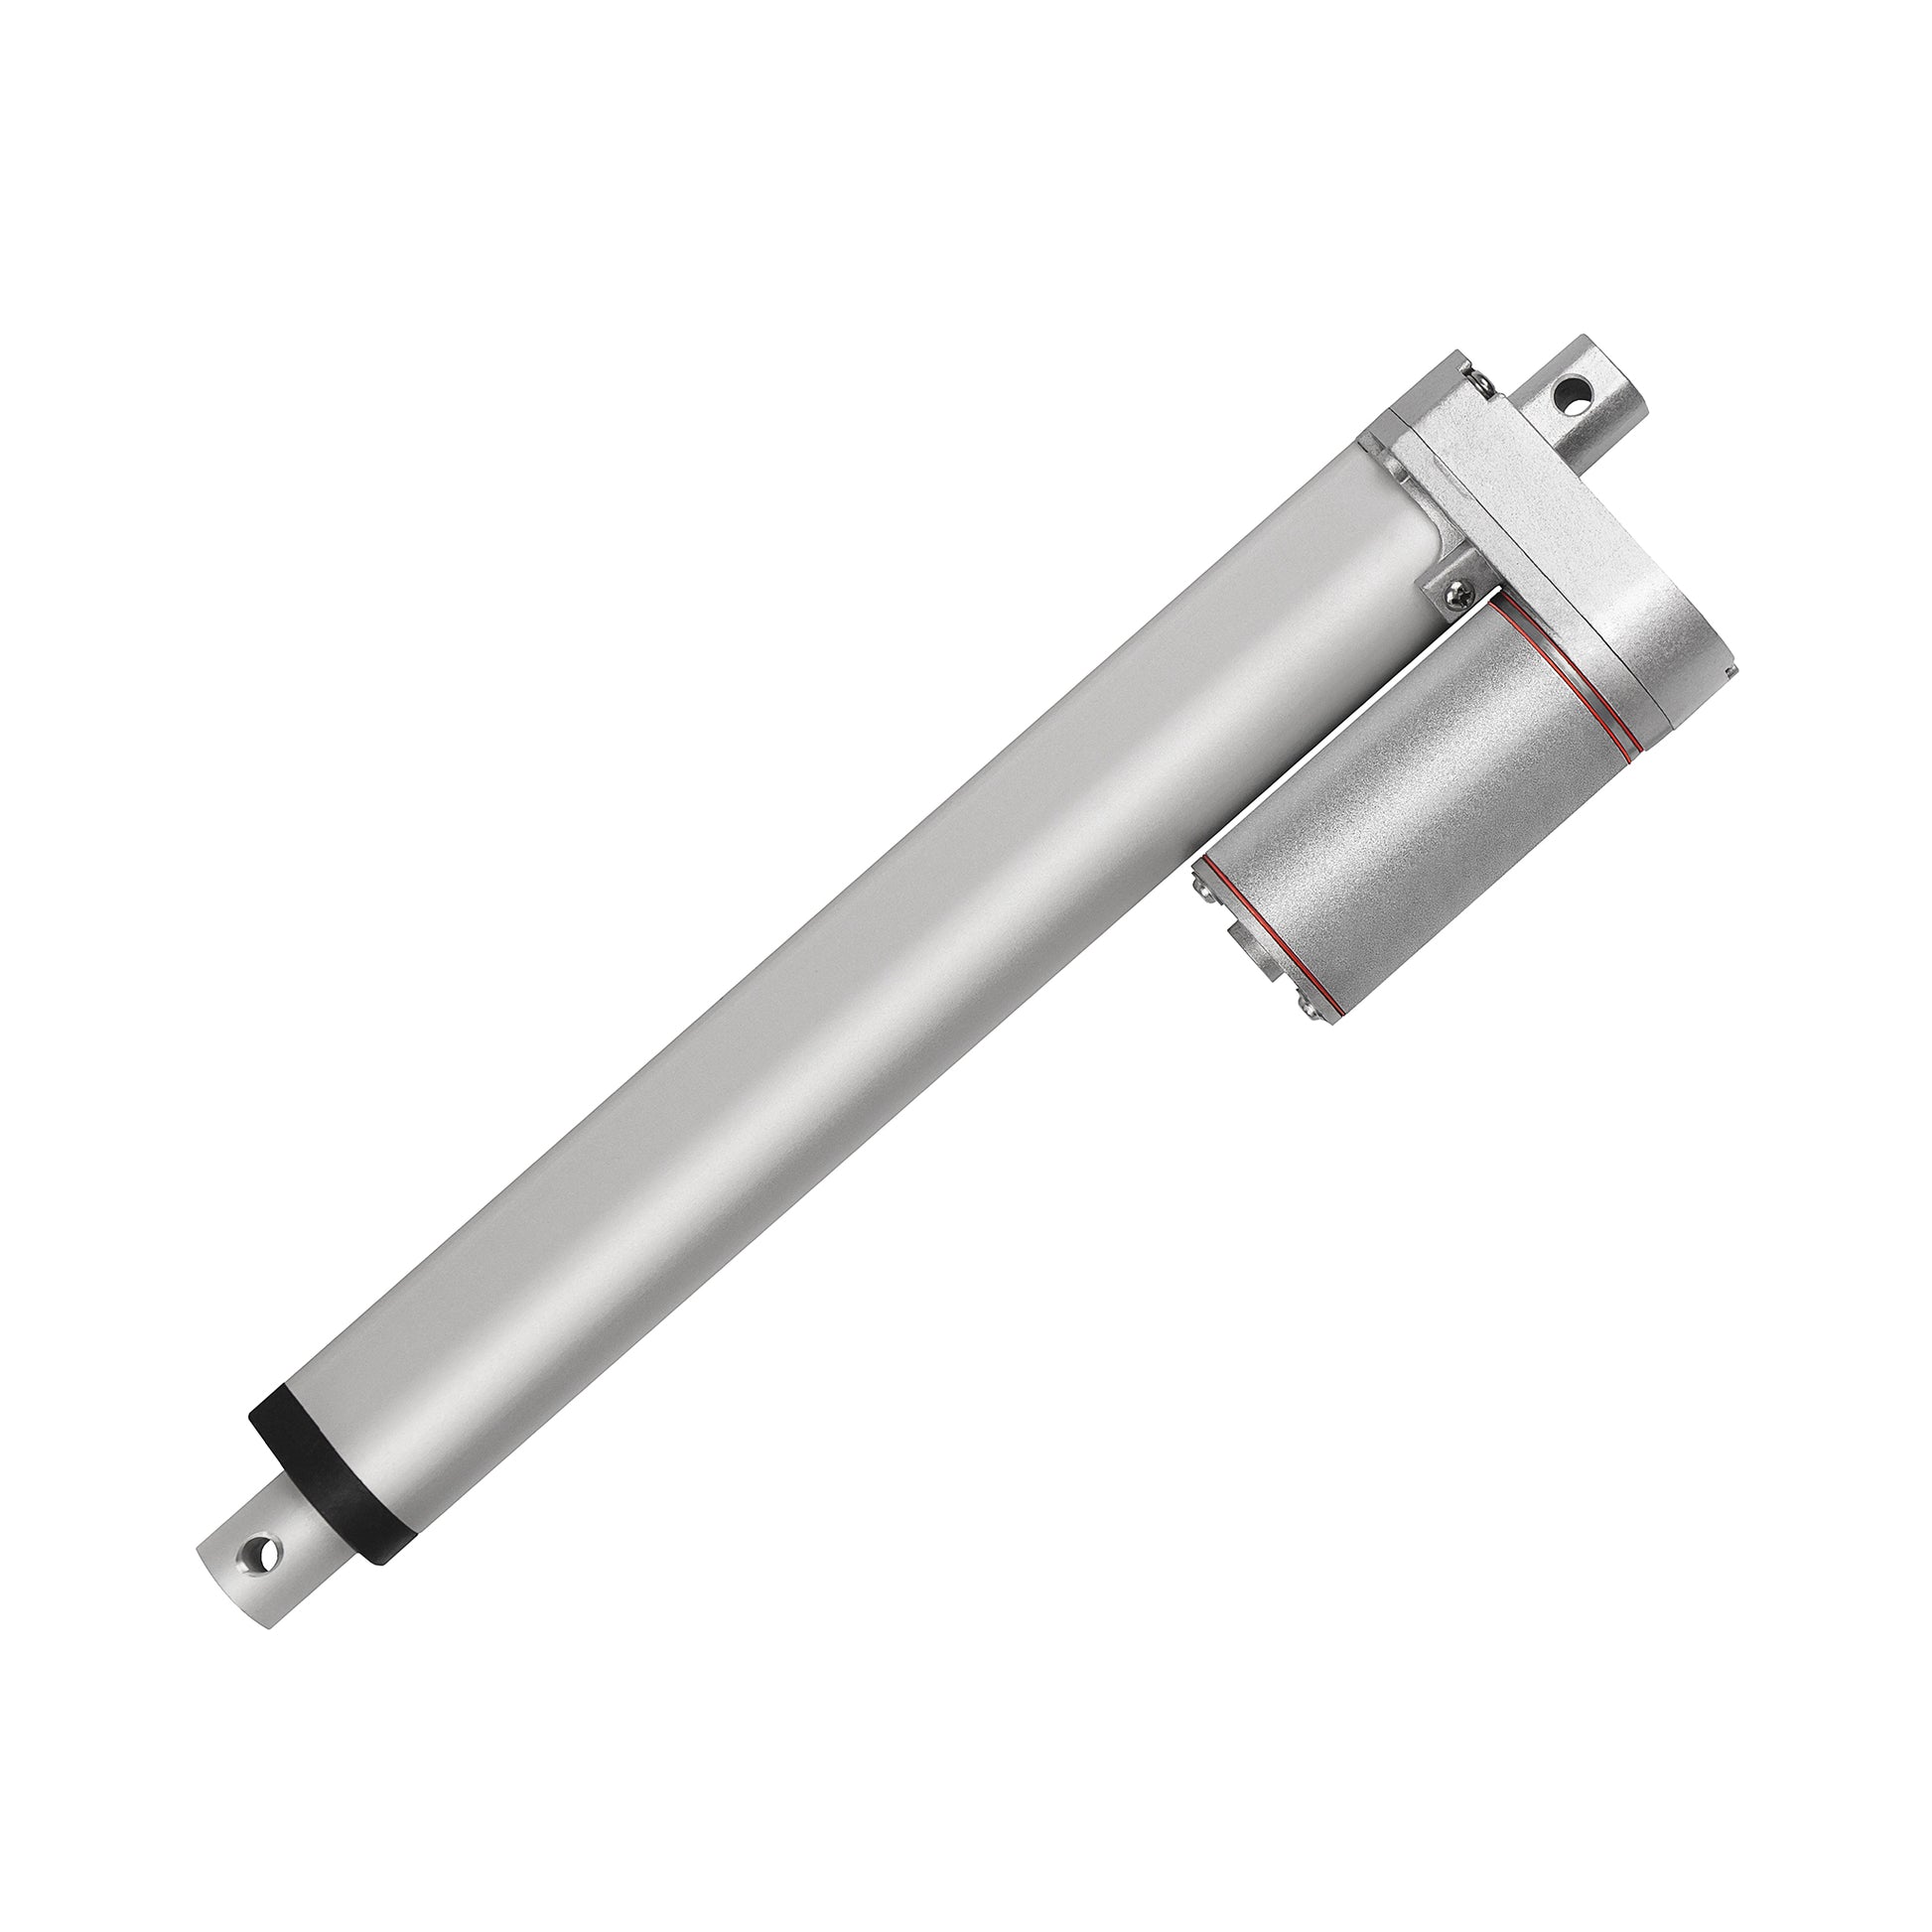 Direct-Drive Compact Linear Motor IP65 12V Generator Linear Actuator Price  - China Small Linear Actuator, High Performance Linear Actuator